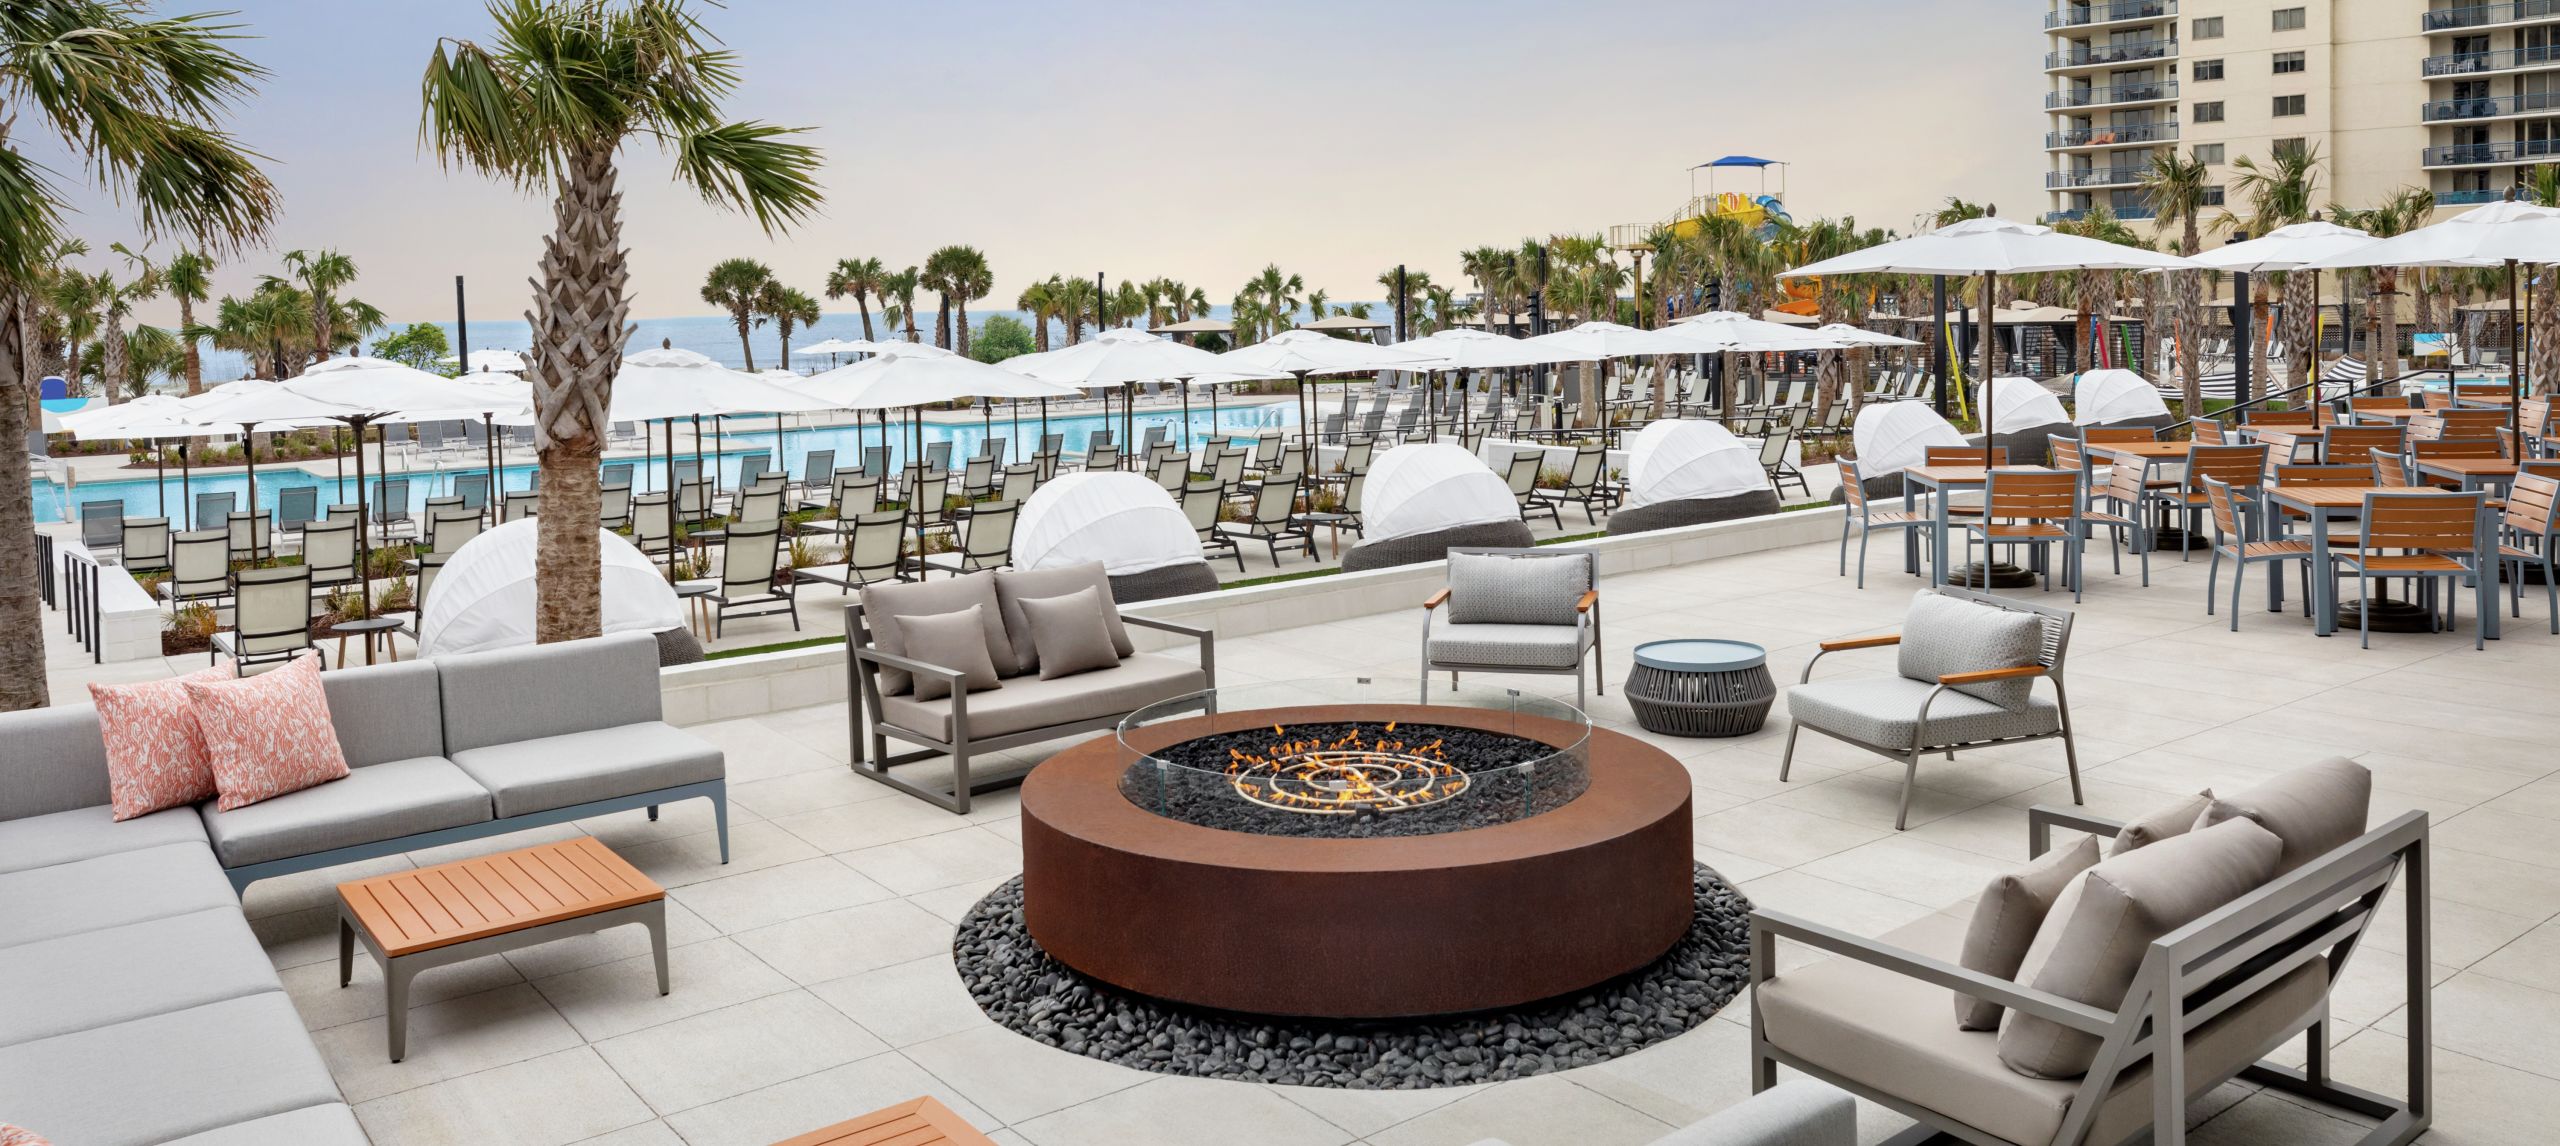 Beautiful outdoor brewery terrace featuring comfortable seating with outdoor fire pit and ocean views